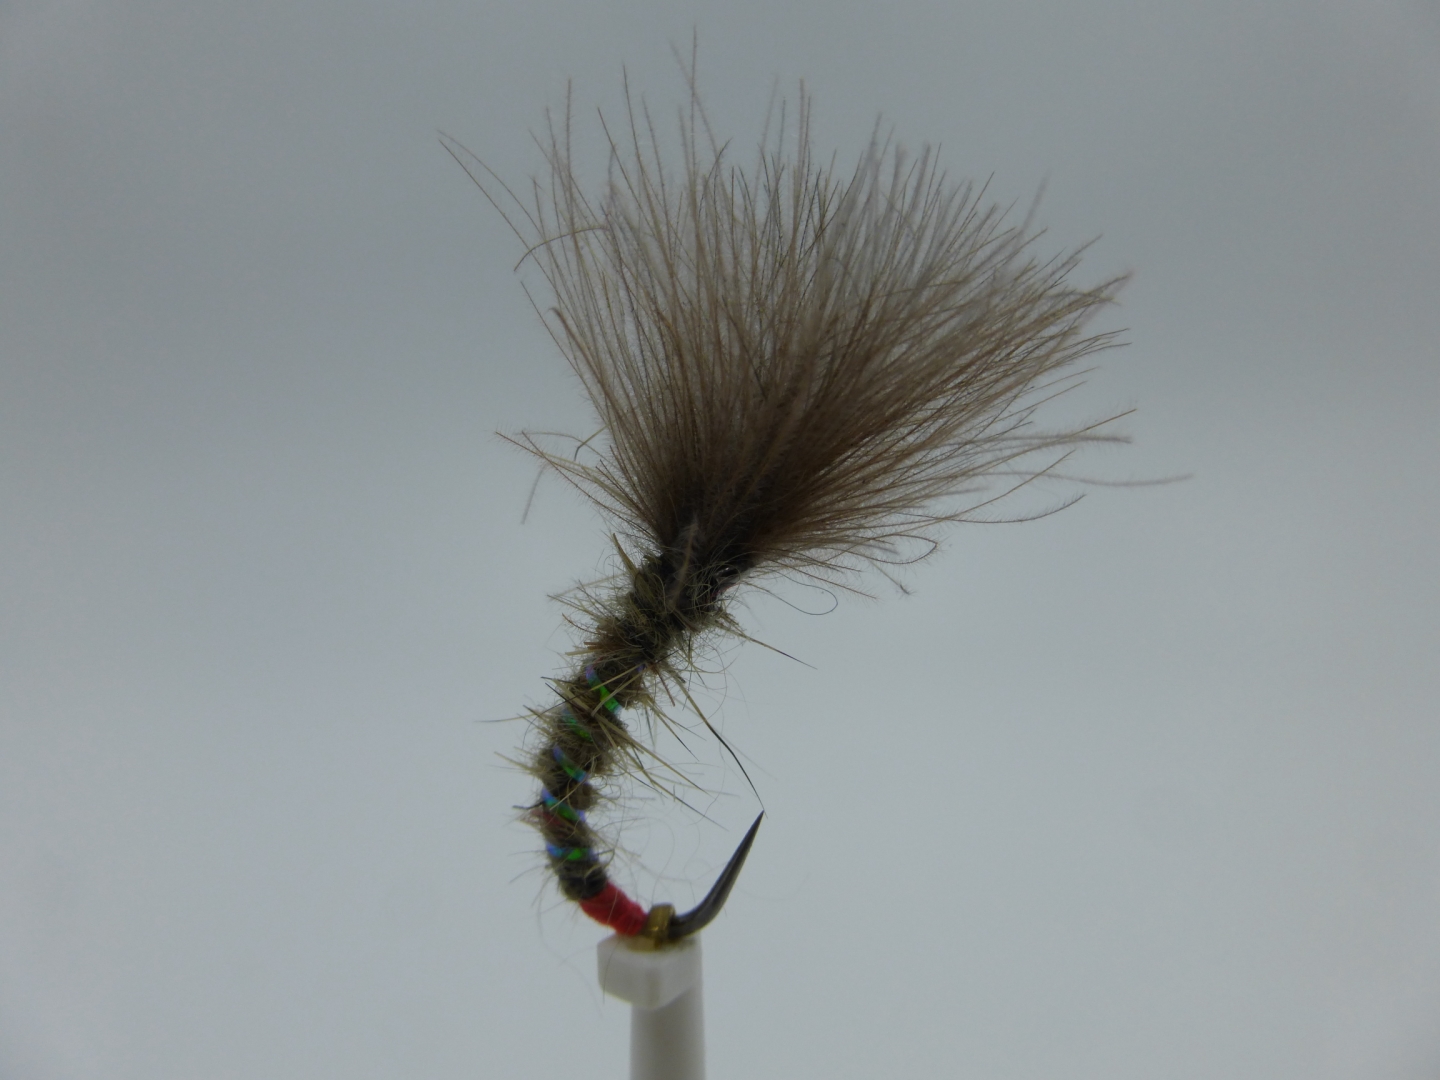 Size 14 CDC Owl Hare,s Ear Barbless